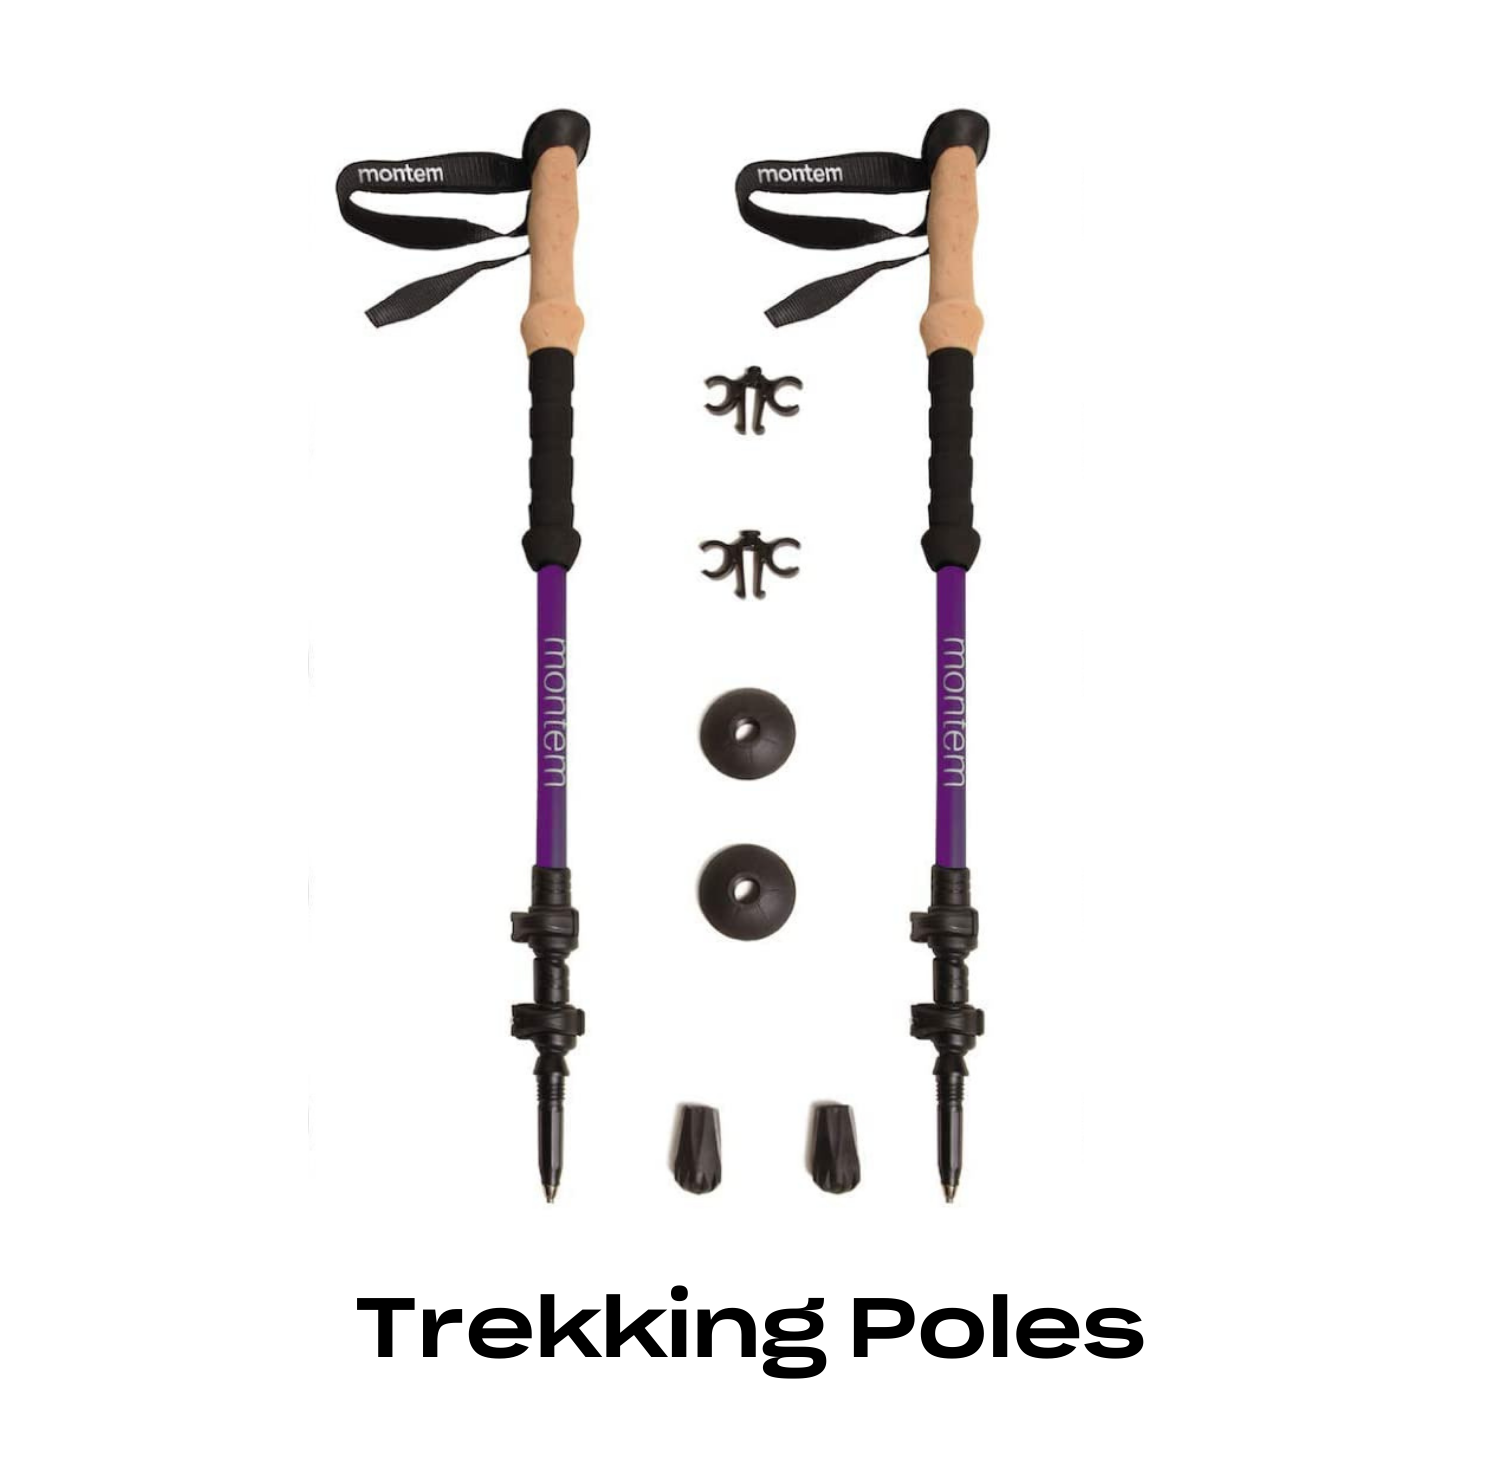 Graphic for trekking poles, a great mother's day gift.